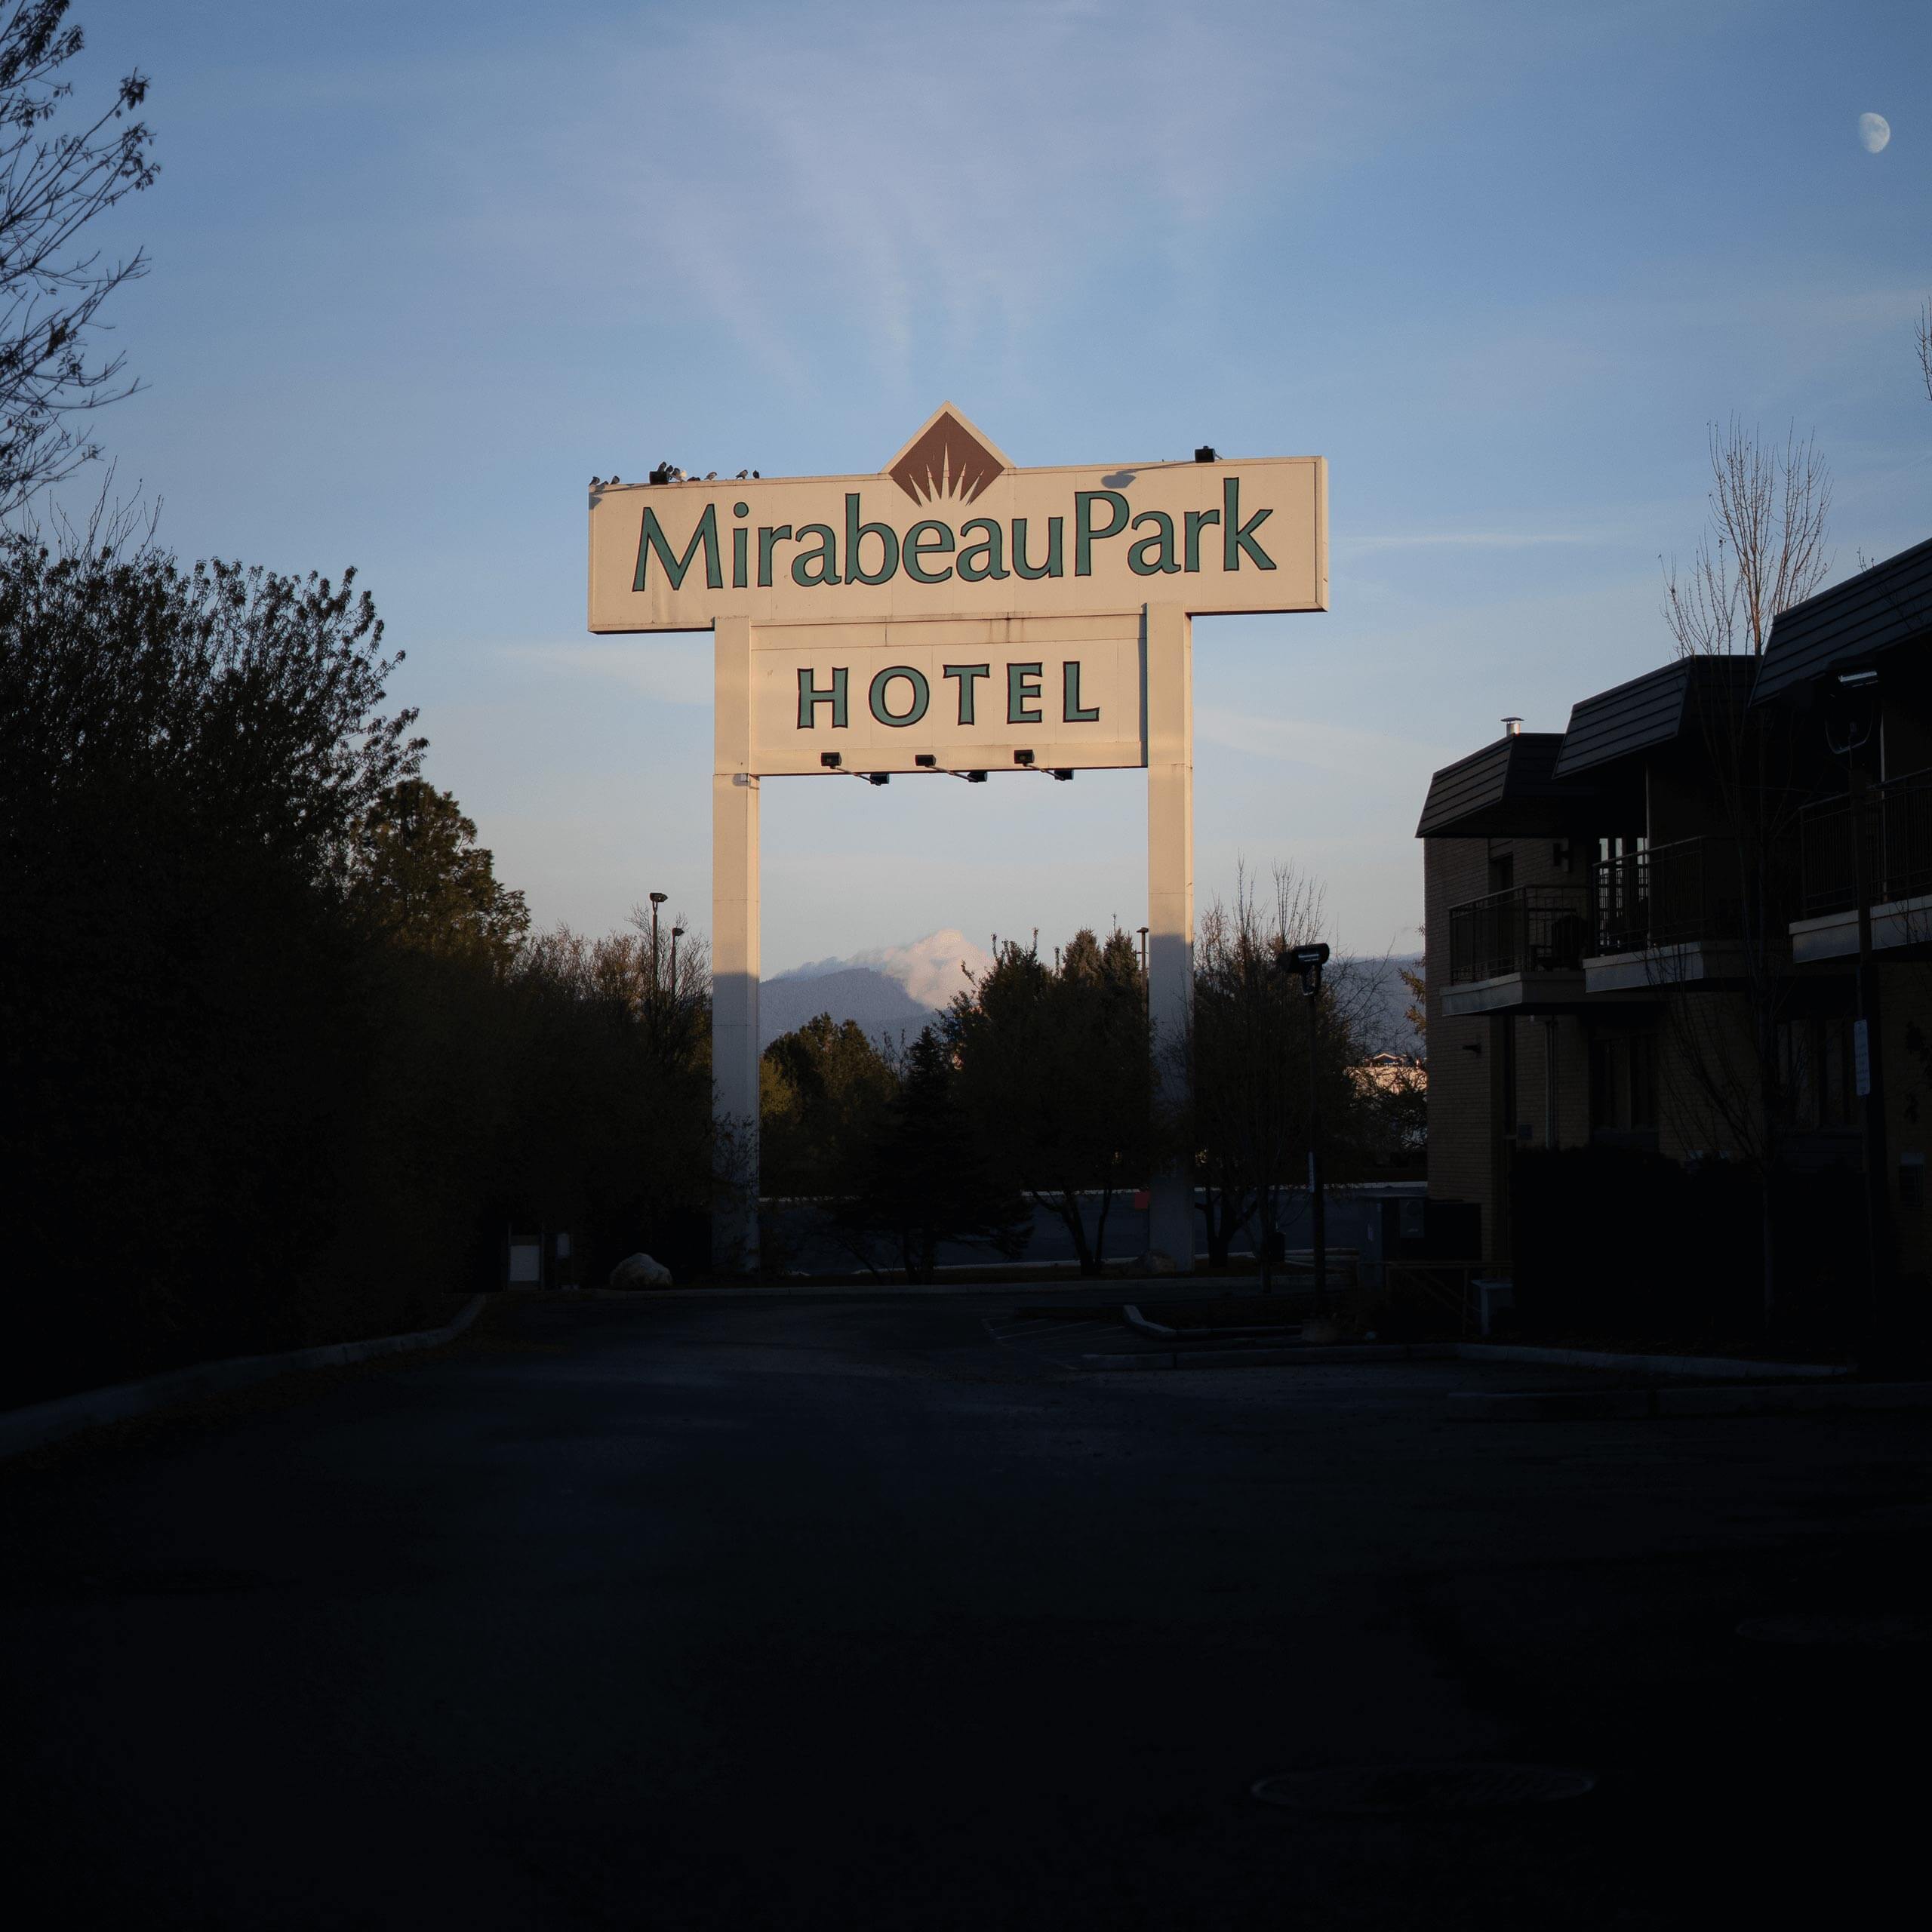 The signage of a Mirabeau Park hotel.